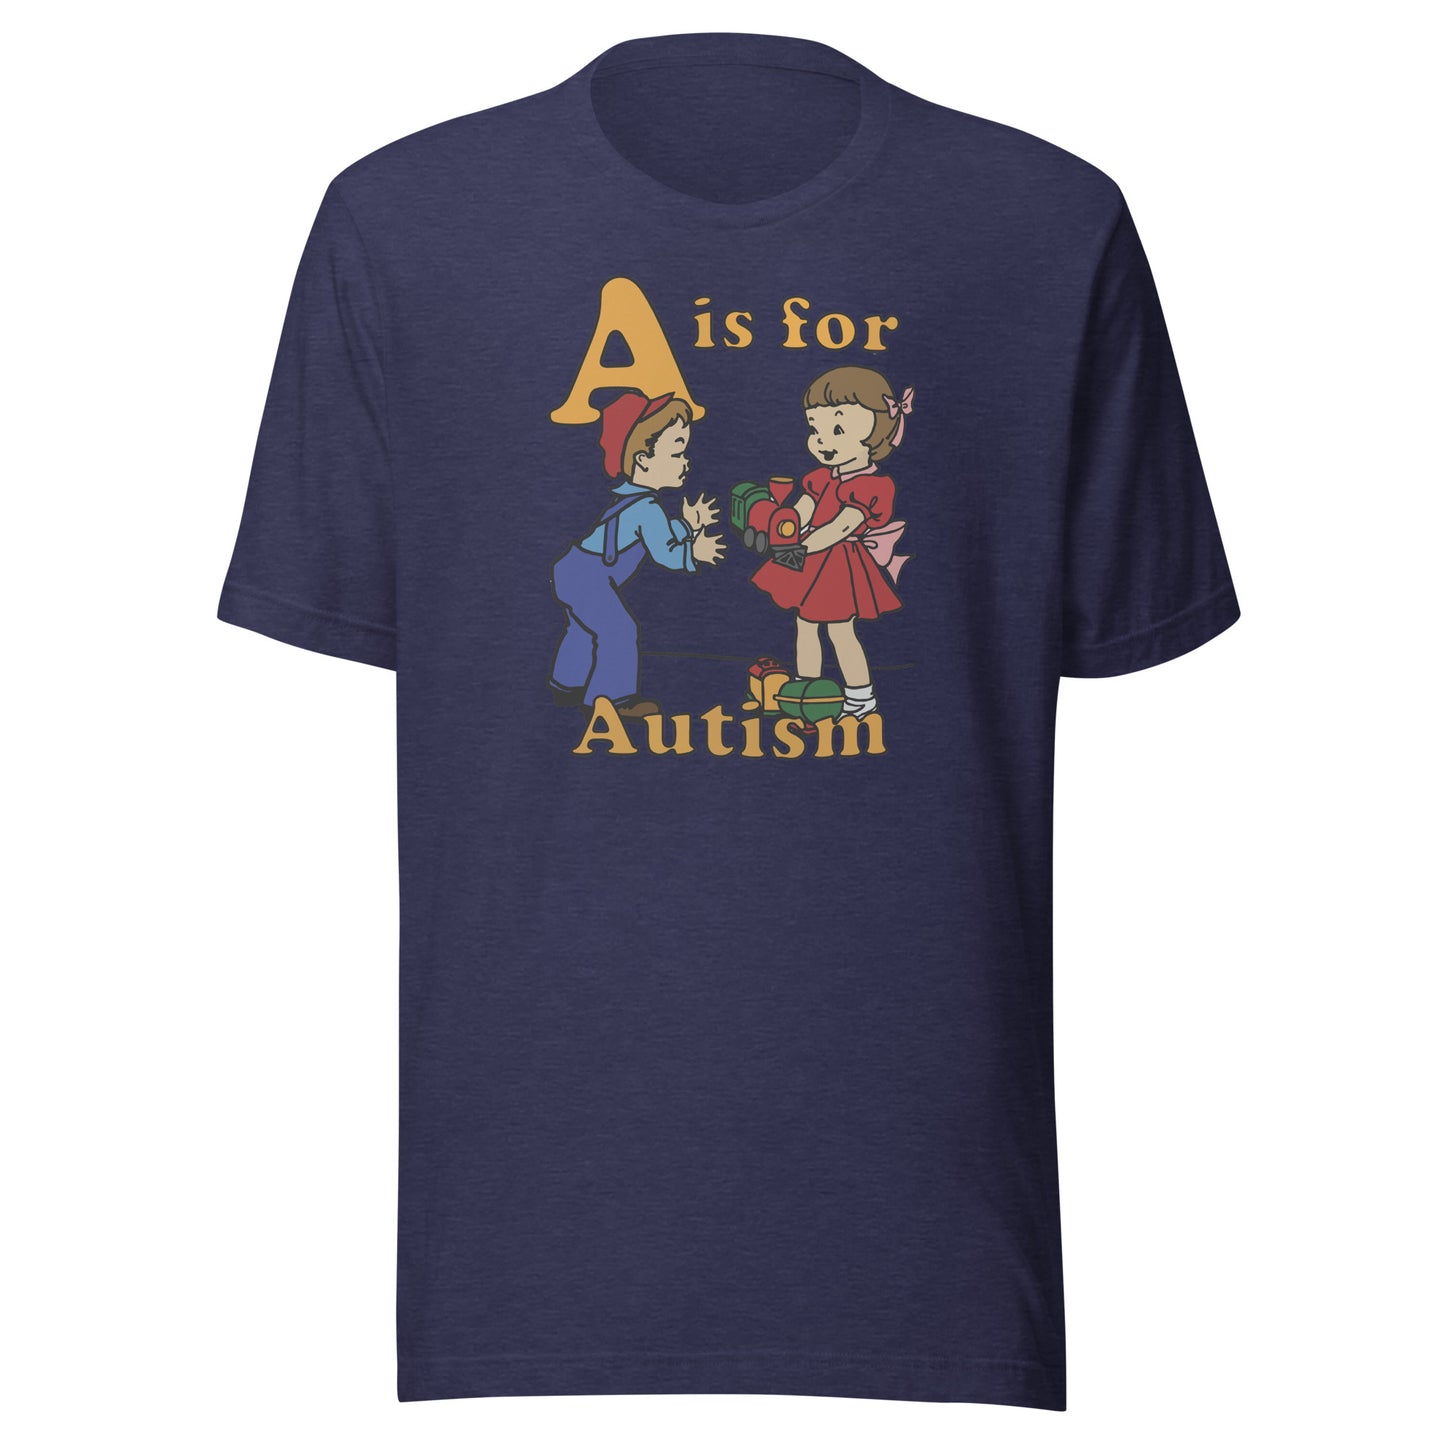 A is for Autism Unisex t-shirt